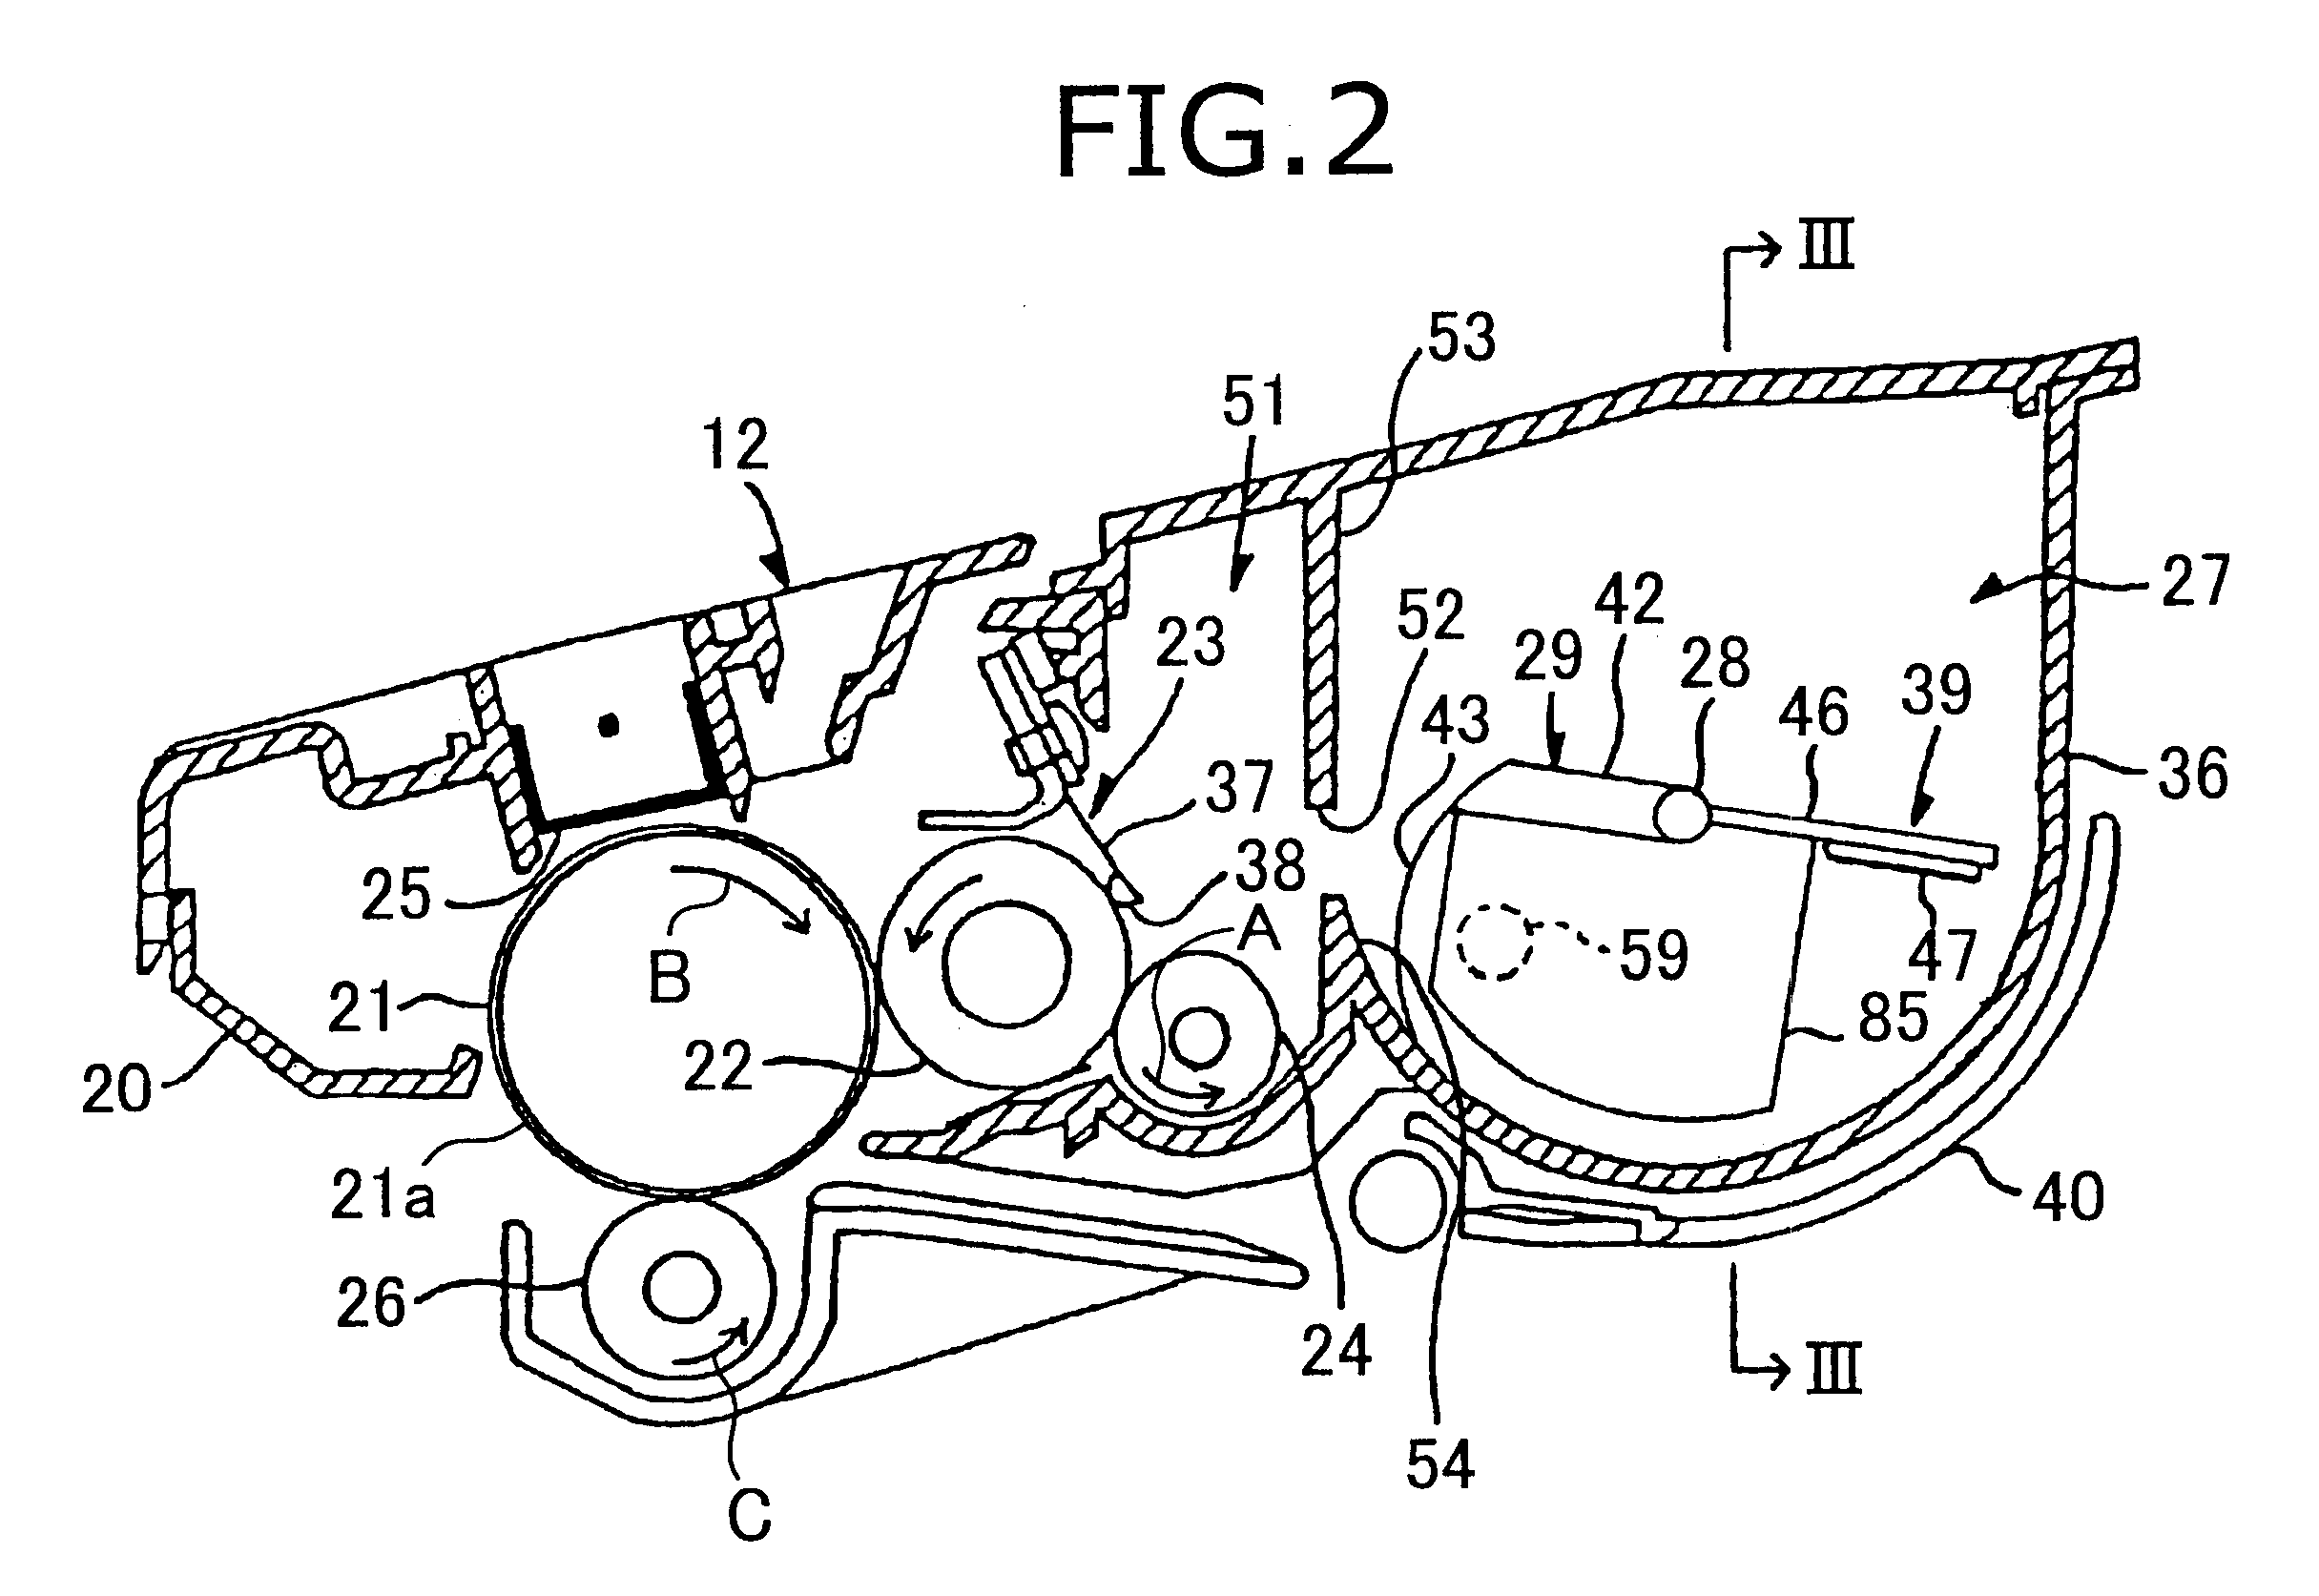 Developing cartridge with agitator driven to rotate independent from developing roller